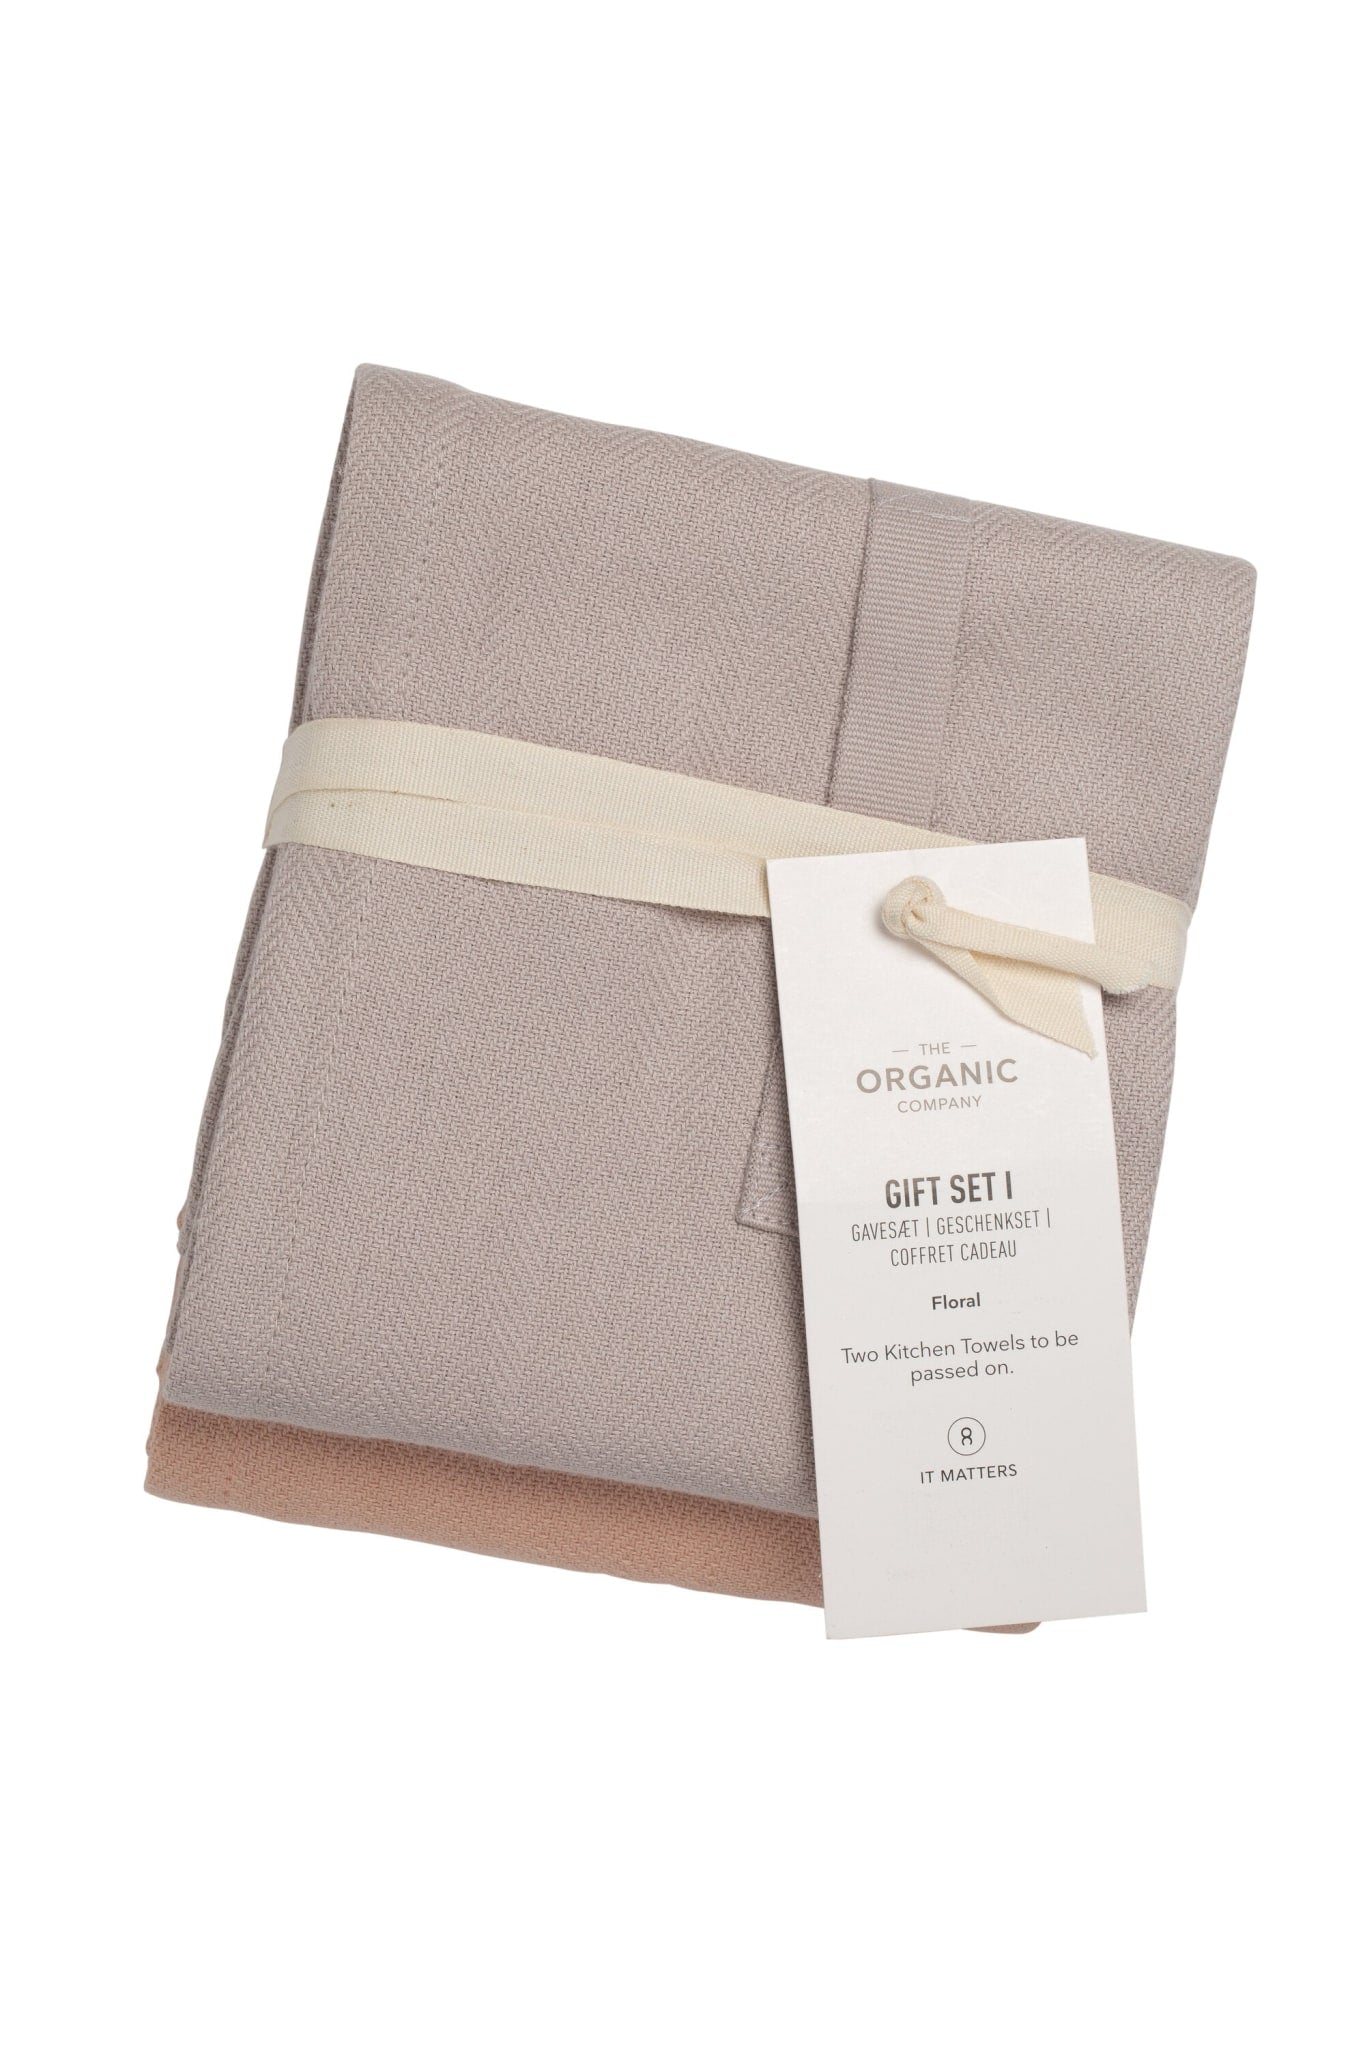 The Organic Company Gift Set I, Floral